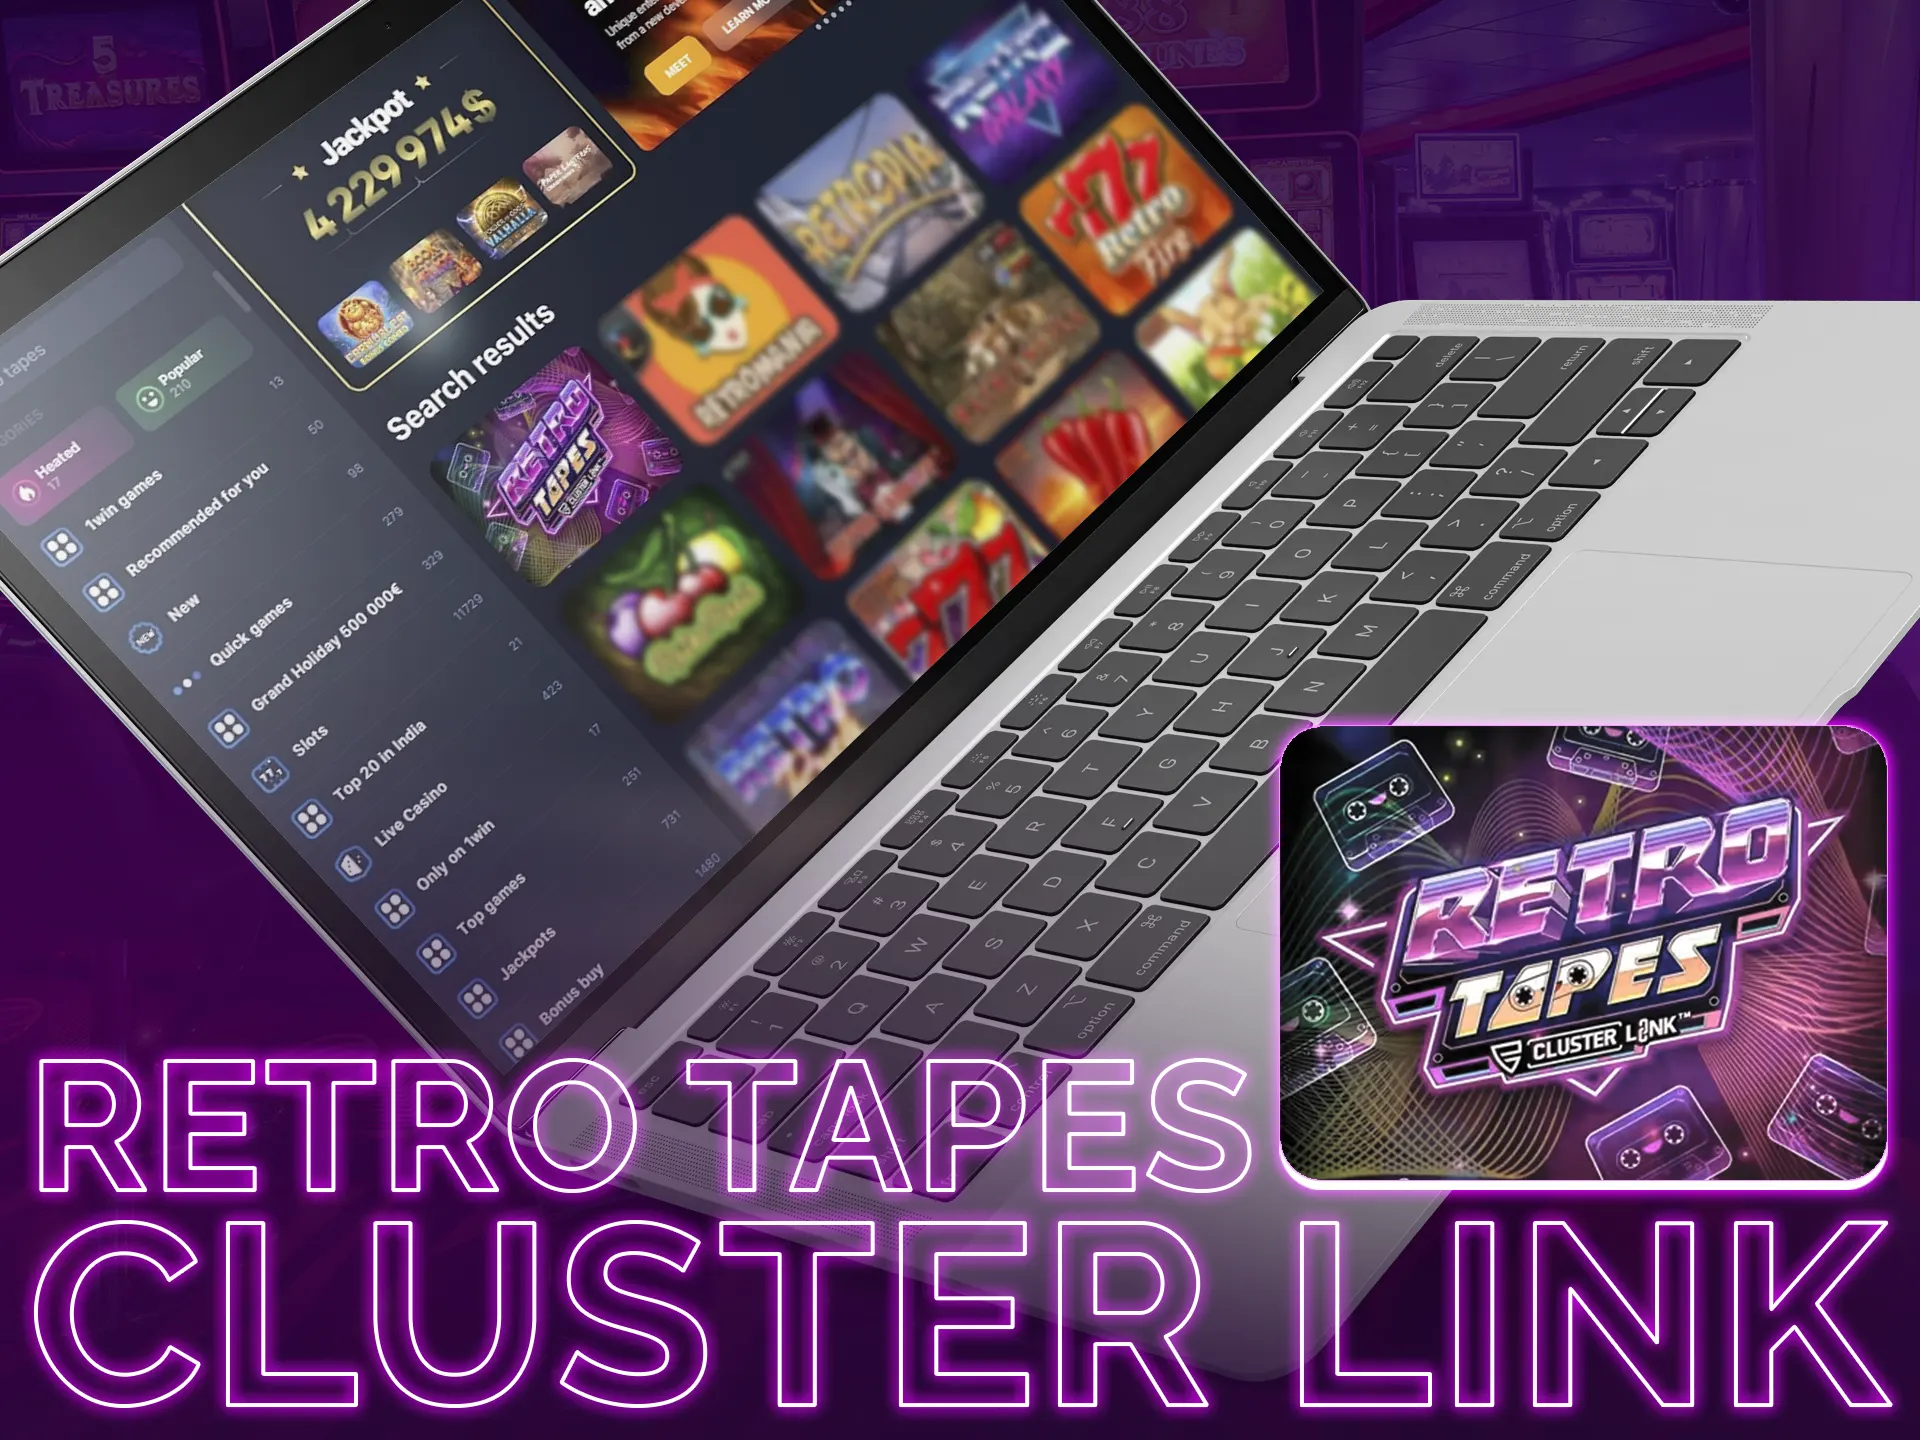 Retro tapes cluster link slot: Cosmic theme, customizable reels, high RTP.